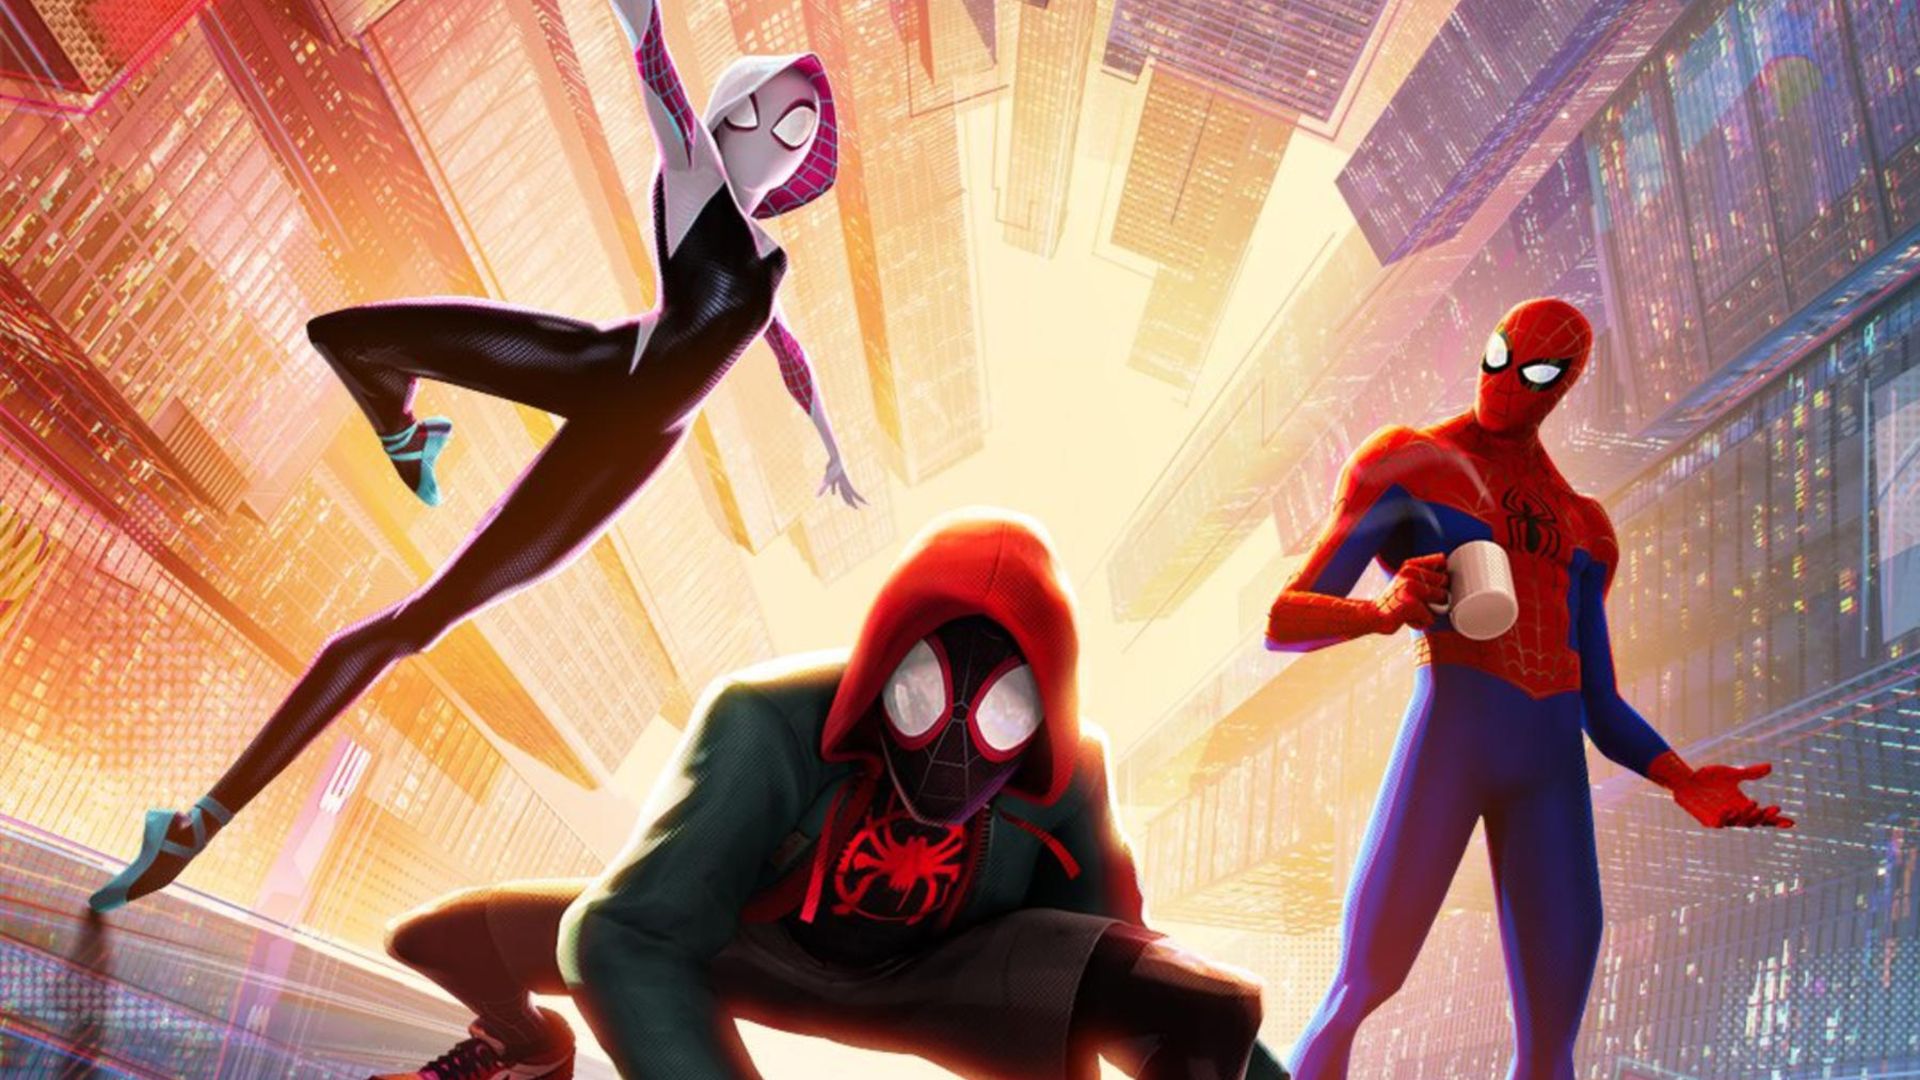 spider-man-into-the-spider-verse-sequel-in-the-works-to-release-by-2022-2